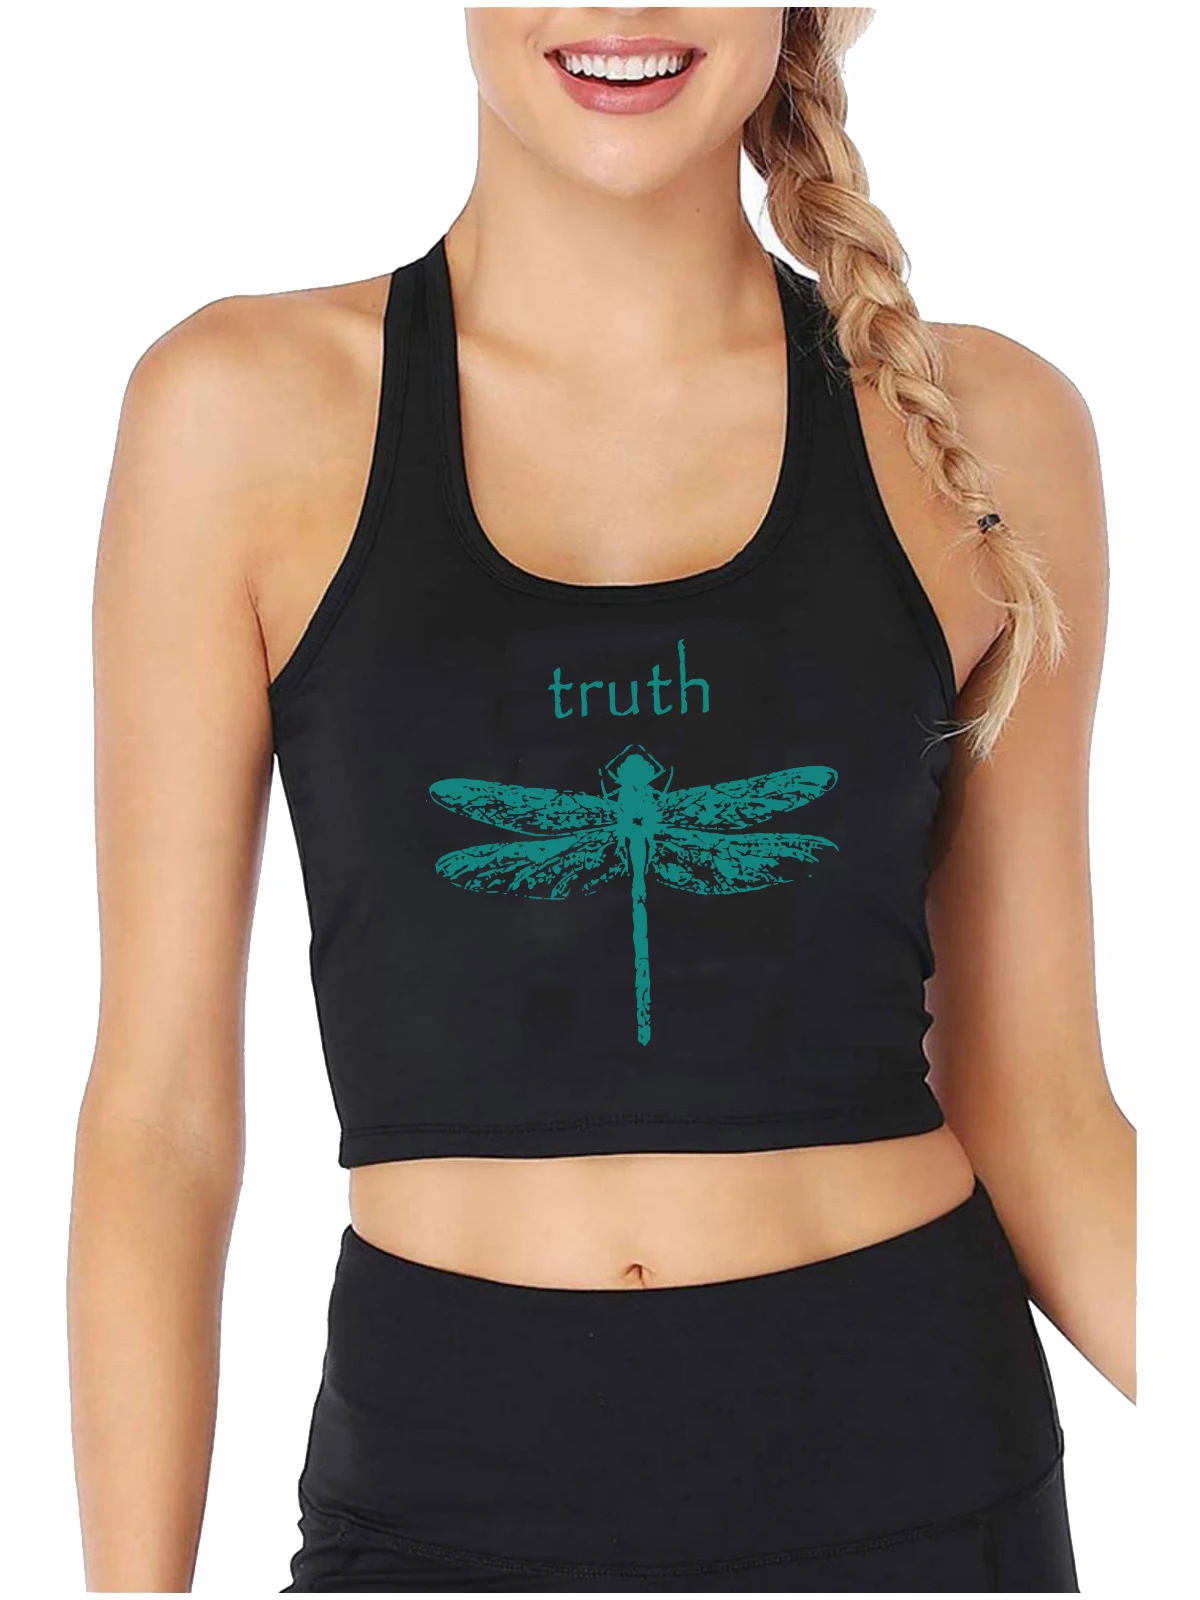 

Turquoise Dragonfly Truth Damselfly Wings Design Sexy Crop Top Women's High Street Fashion Tank Tops Cotton Fitness Camisole